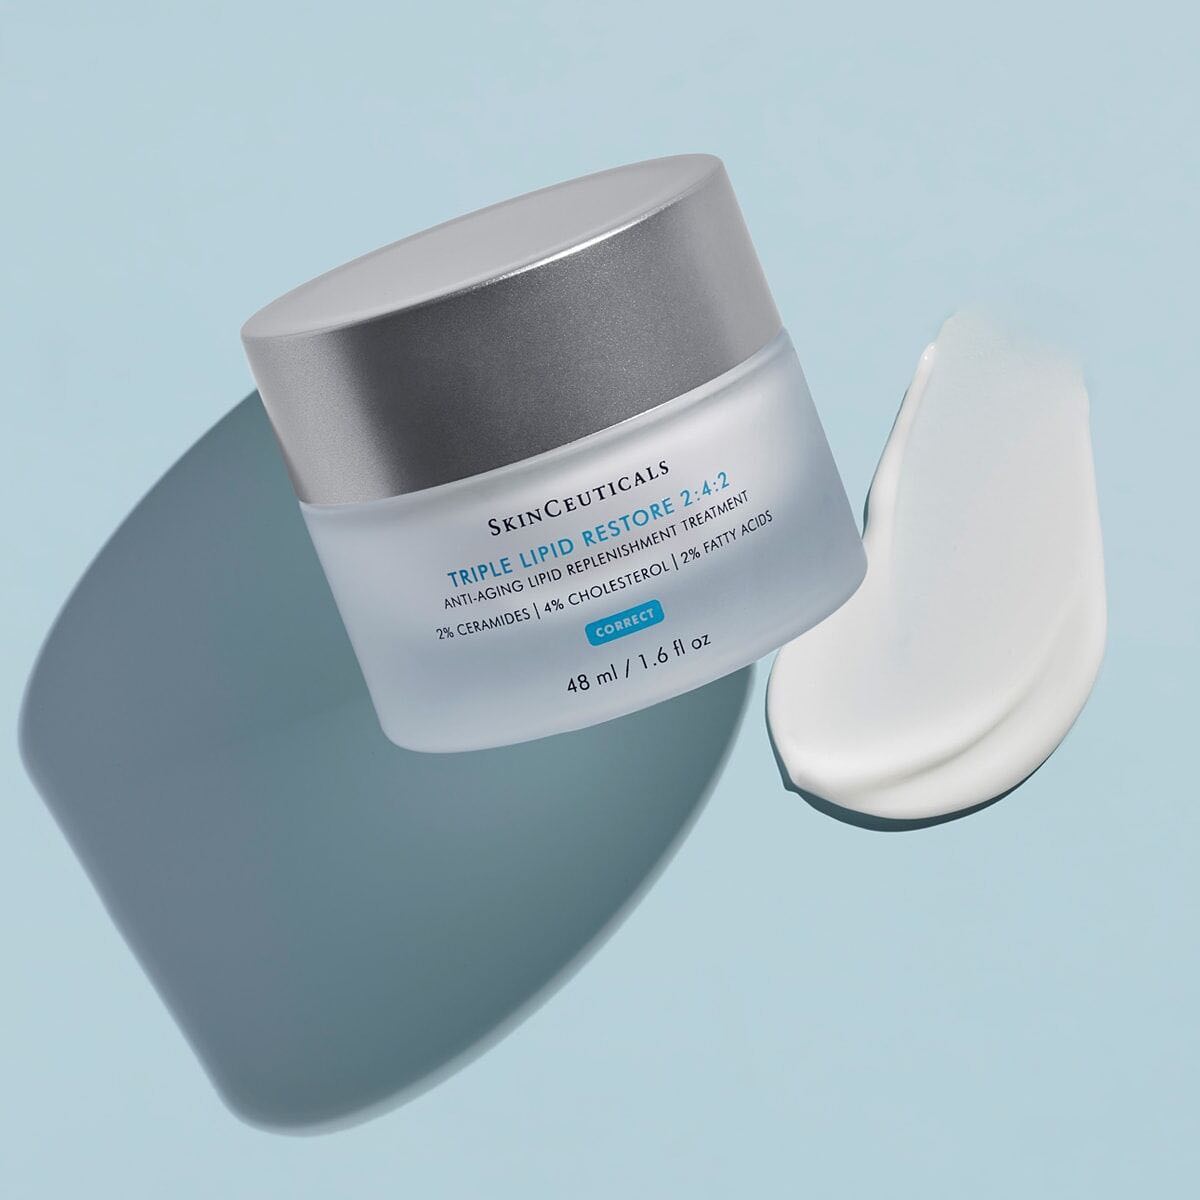 Highlighting one of most popular products and best sellers! 
As we move into the colder and dryer months- this is a must have product ! We just restocked so come in and grab yours today . 
 
SKIN TYPES: Dry, Normal, Oily, Combination, Sensitive

SKIN CONCERN: Dehydrated, Aging

FEATURES:
Triple Lipid Restore 2:4:2 is an anti-aging cream that contains the optimal and patented lipid ratio of 2% pure ceramides 1 and 3, 4% natural cholesterol, and 2% fatty acids, which is proven to nourish skin and correct signs of aging. This unique lipid correction cream contains the first 2:4:2 cholesterol-dominant ratio to help restore skin's external barrier and support natural self-repair, while potently nourishing aging skin for improvement in the visible appearance of skin smoothness, laxity, pores, and overall radiance.

BENEFITS:
Restores essential skin lipids: ceramides, natural cholesterol, and fatty acids
Improves the look of skin fullness, texture, and pore appearance
Improves the appearance of skin evenness and overall radiance
Unique lipid stabilization system in a lightweight and fast-absorbing texture
Shortens the adjustment period to retinoids up to 1 week while reducing dryness (see Science & Proof below)
Paraben-, and dye-free
Ideal for aging, normal, and dry skin types

.
.
#medspa #medicalgradeskincare #skinceuticals @justin_skinceuticals 
#vip
#cosmeticlounge 
#cosmeticloungemd 
#ellicottcity
#repeatmd #treatyourself 
#skincare
#selfcare
#dysport
#botox
#xeomin
#beforeandafter 
#transformation
#naturalresults 
#antiaging
#filler
#threads
#RHA
#Vivace #bestseller 
#IPL #selfcare #hydrating 
#restalynne 
#restalynnekysse
#contour

📍Ellicott City, MD
☎️ 443-388-2225